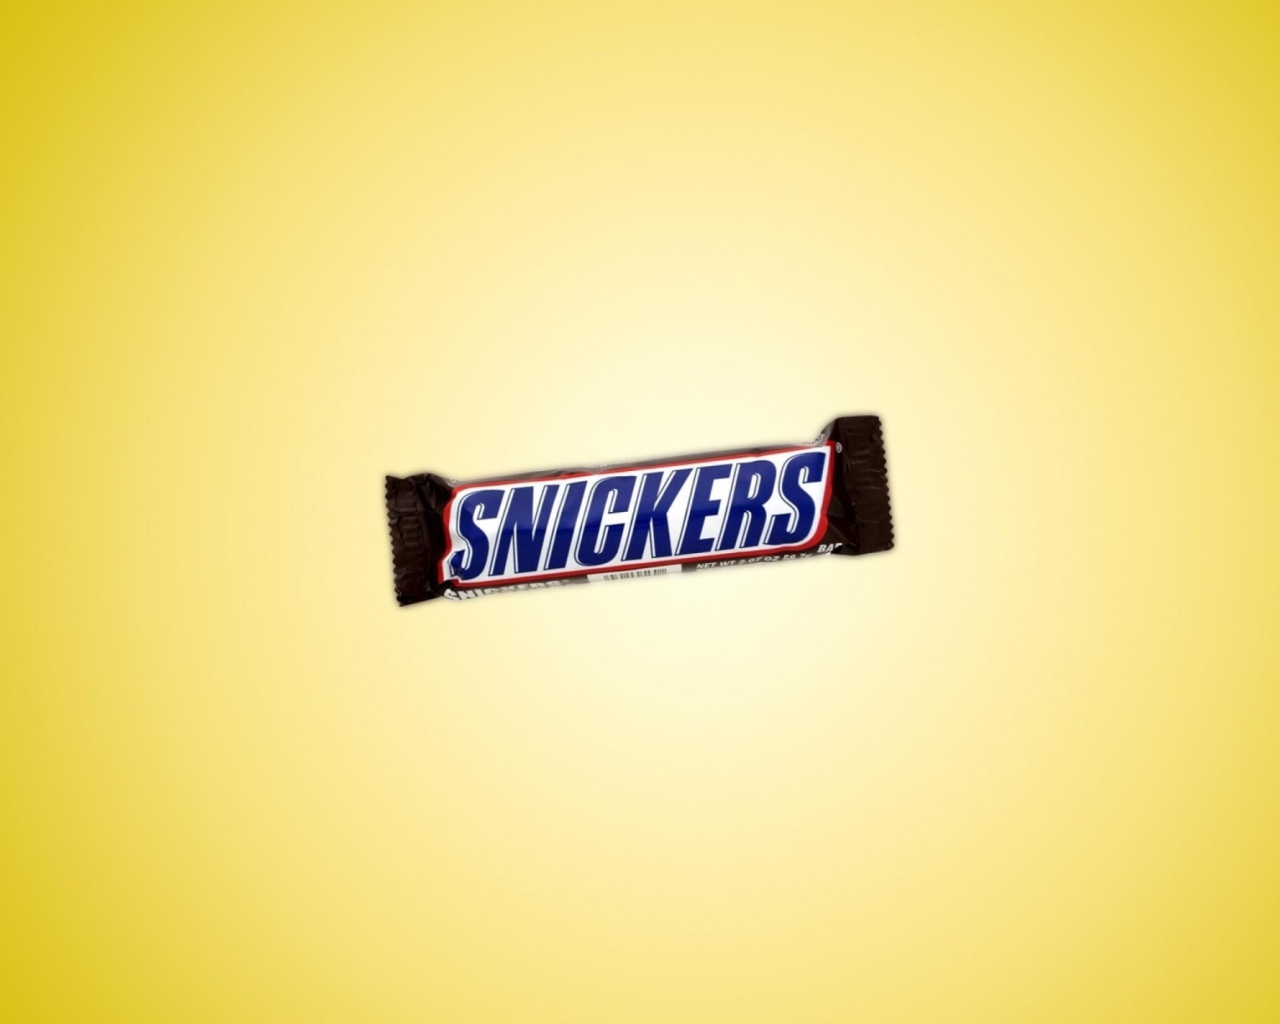 Das Snickers Chocolate Wallpaper 1280x1024